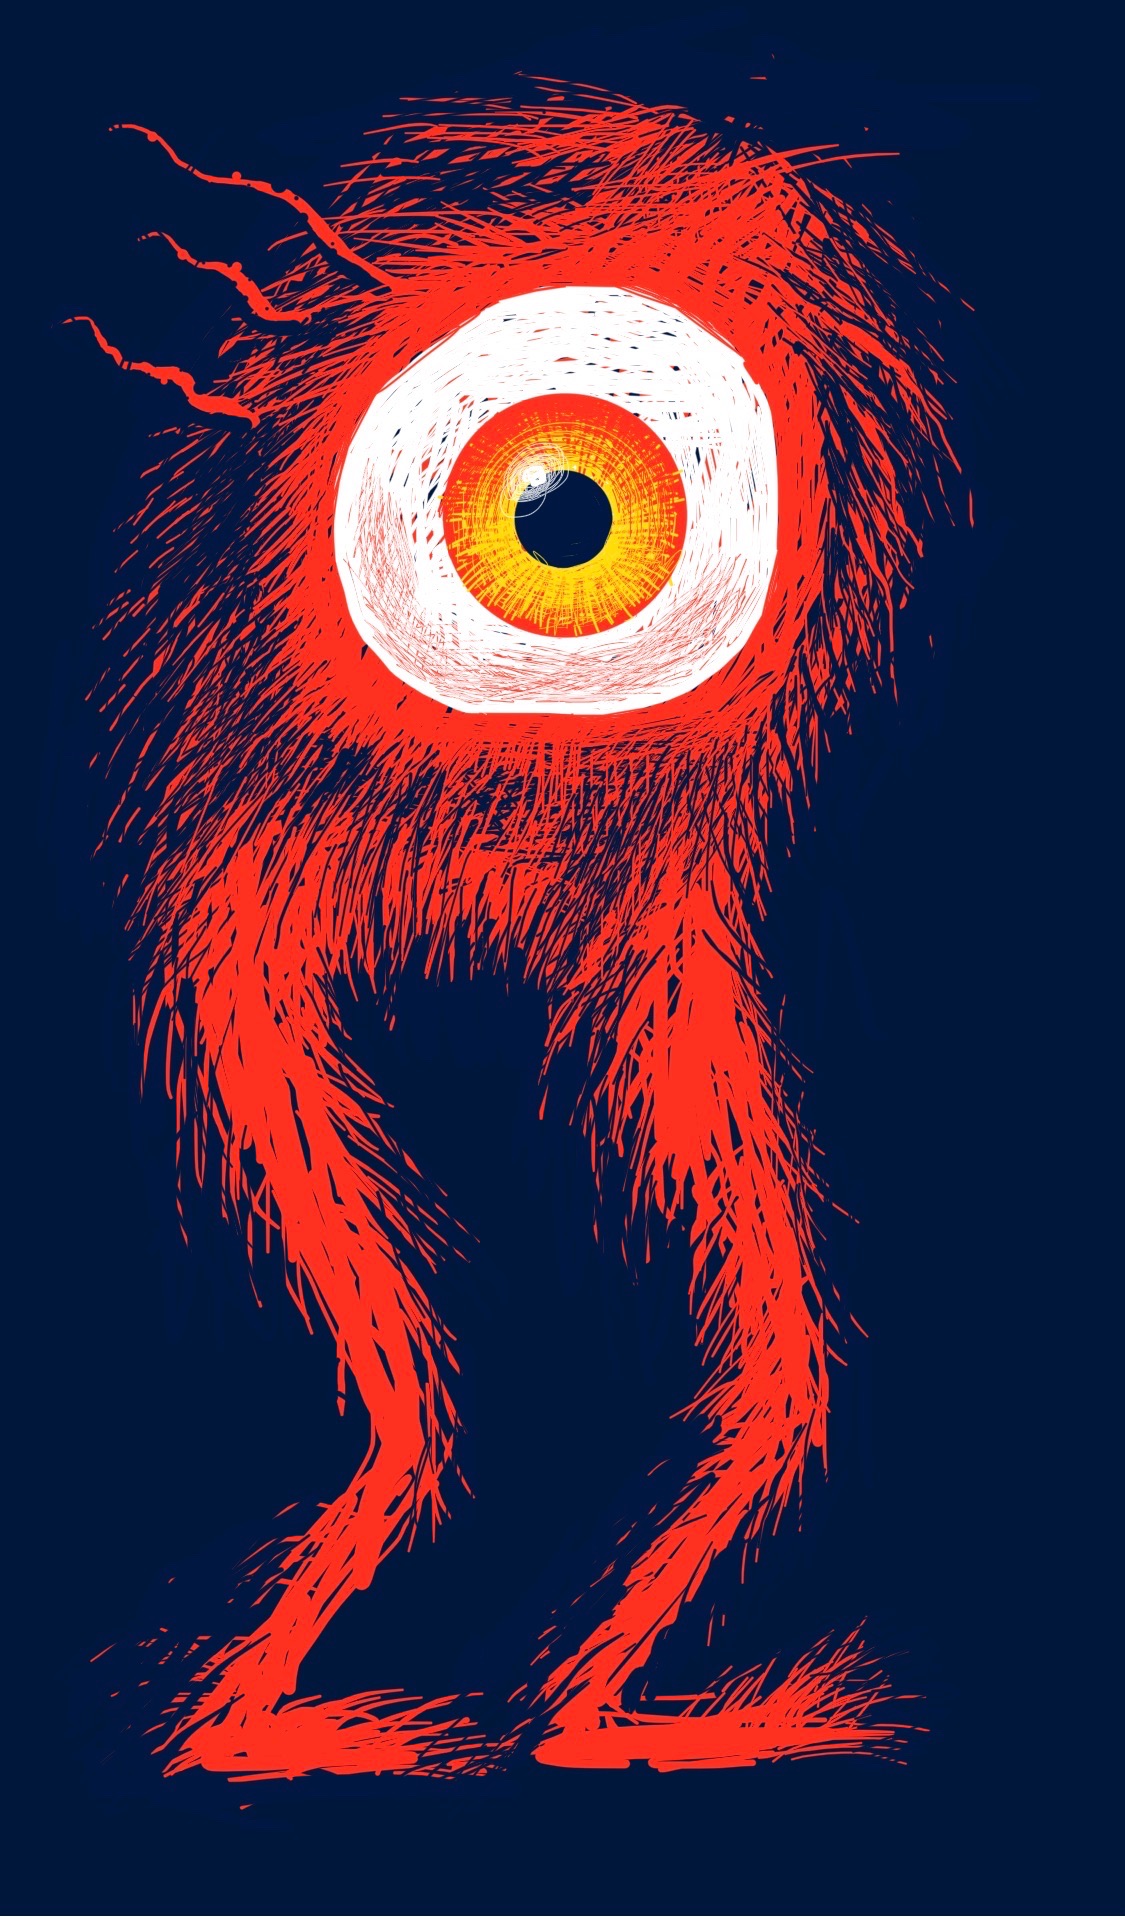 A red, furry monster with one eye